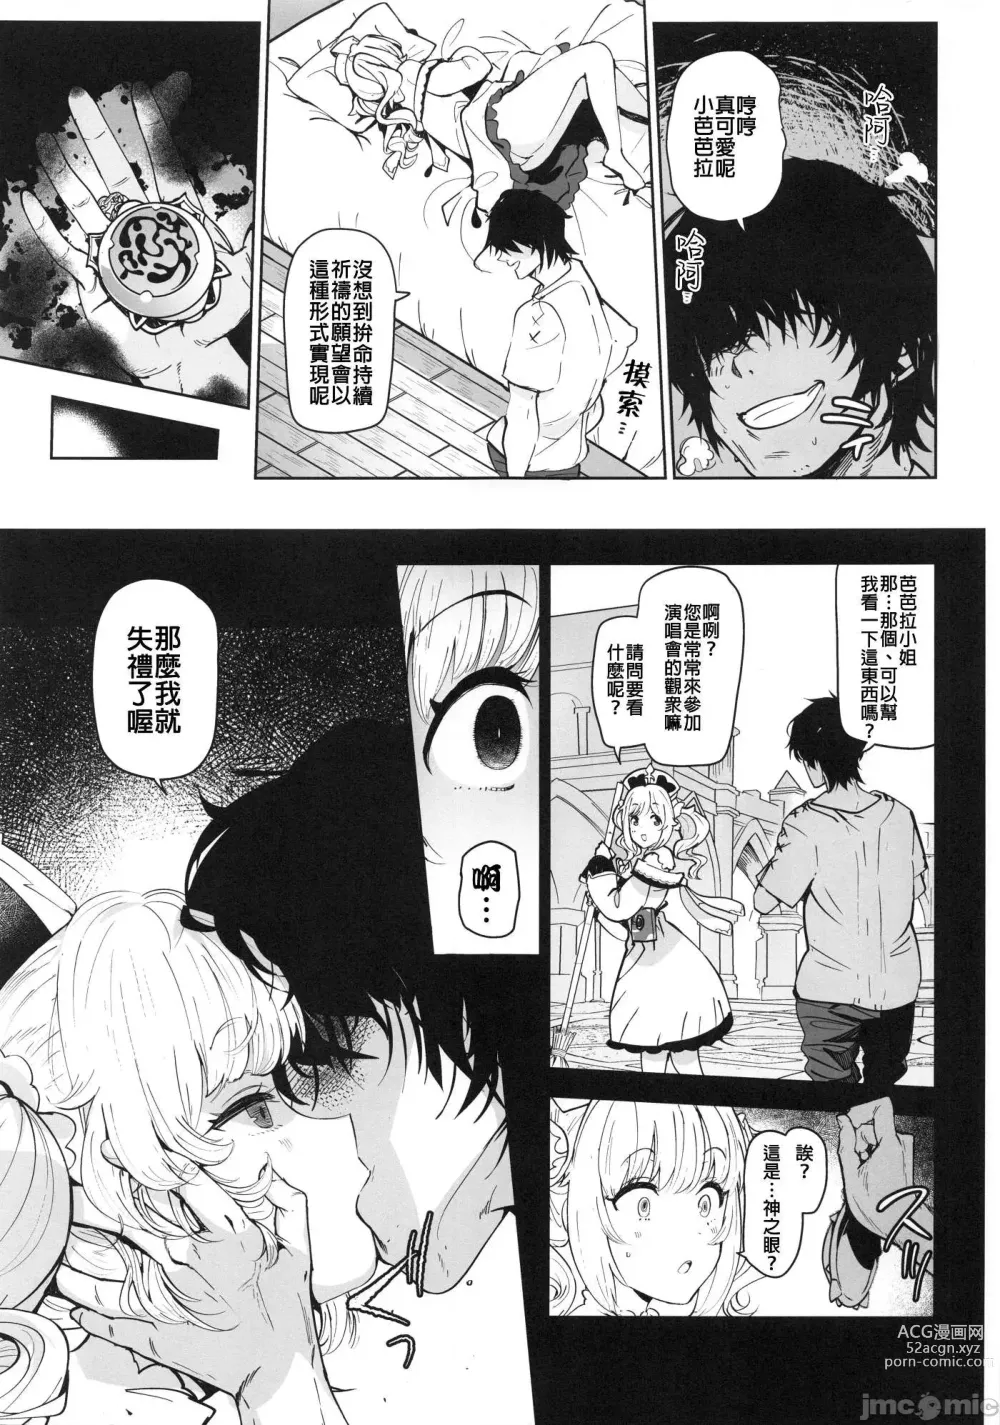 Page 4 of doujinshi 芭芭拉 入眠